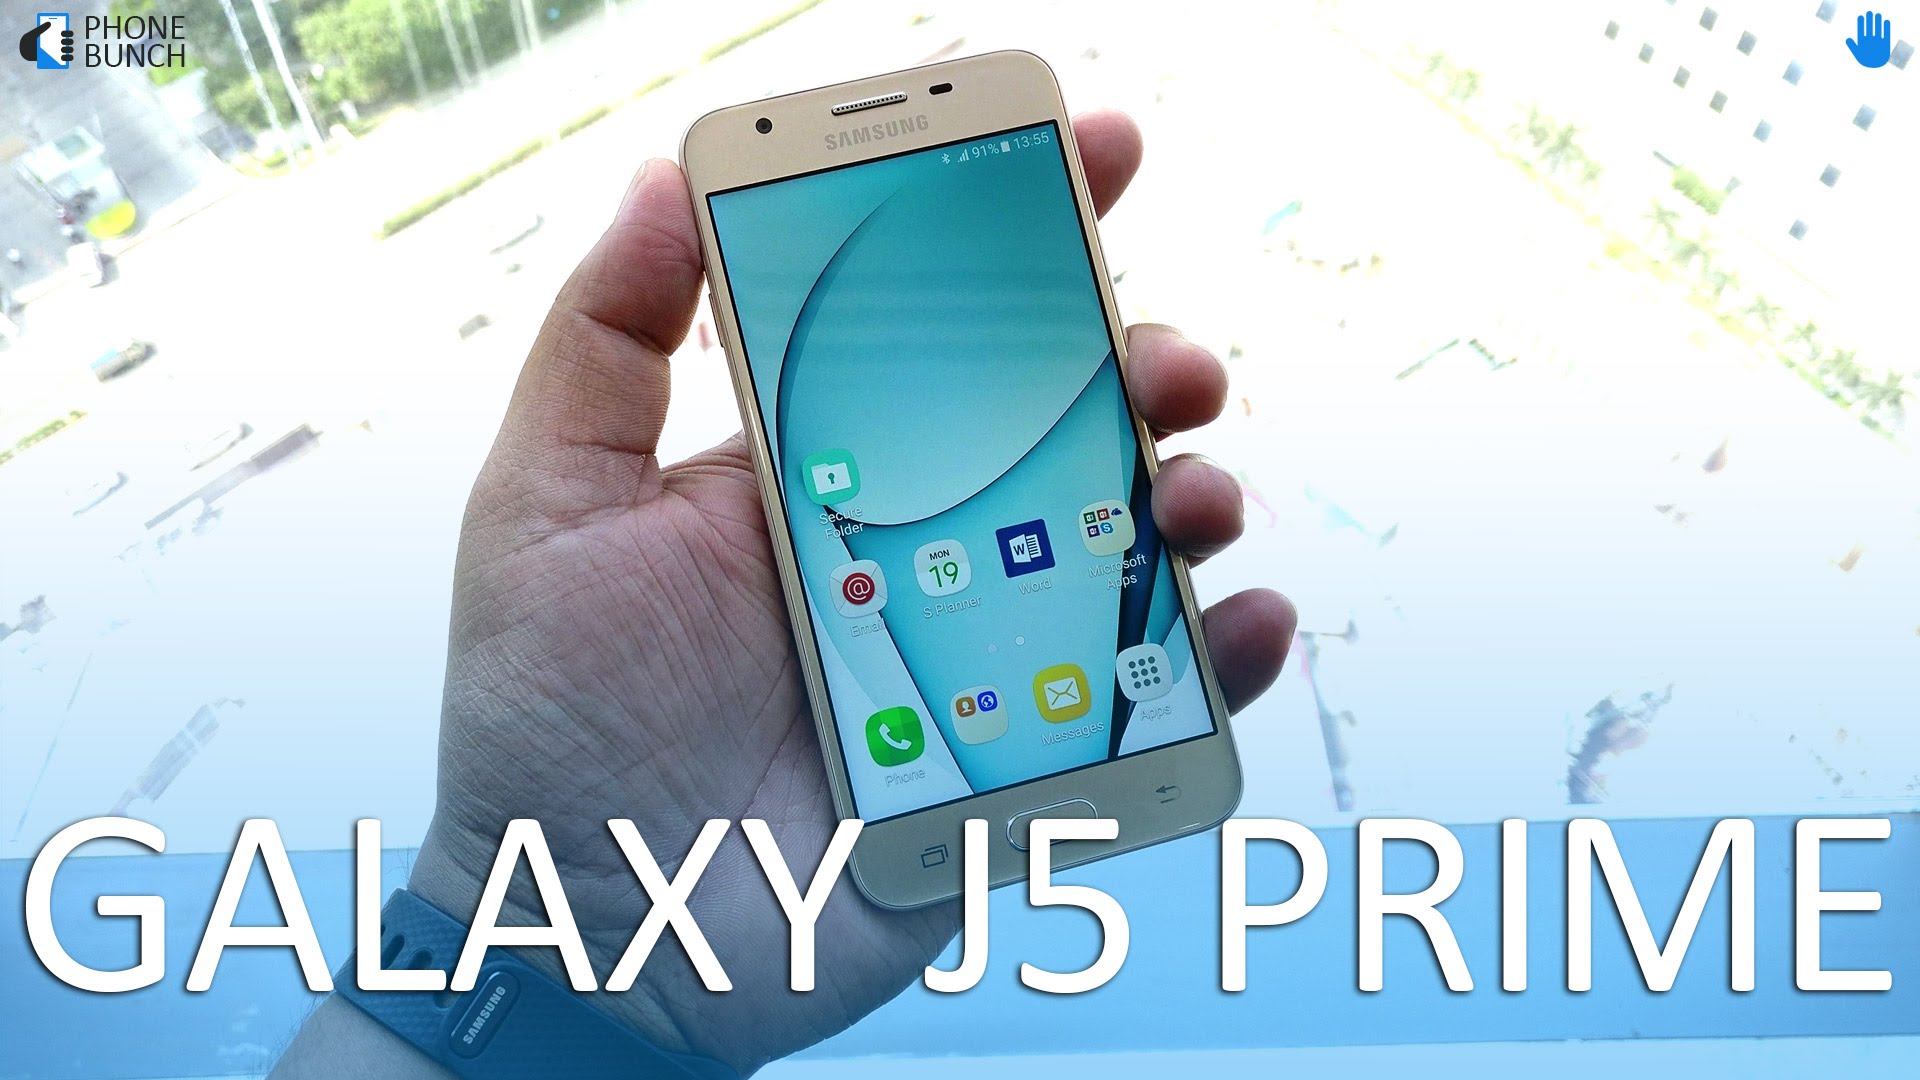 Samsung Galaxy J5 Prime Hands on Camera Samples and Top